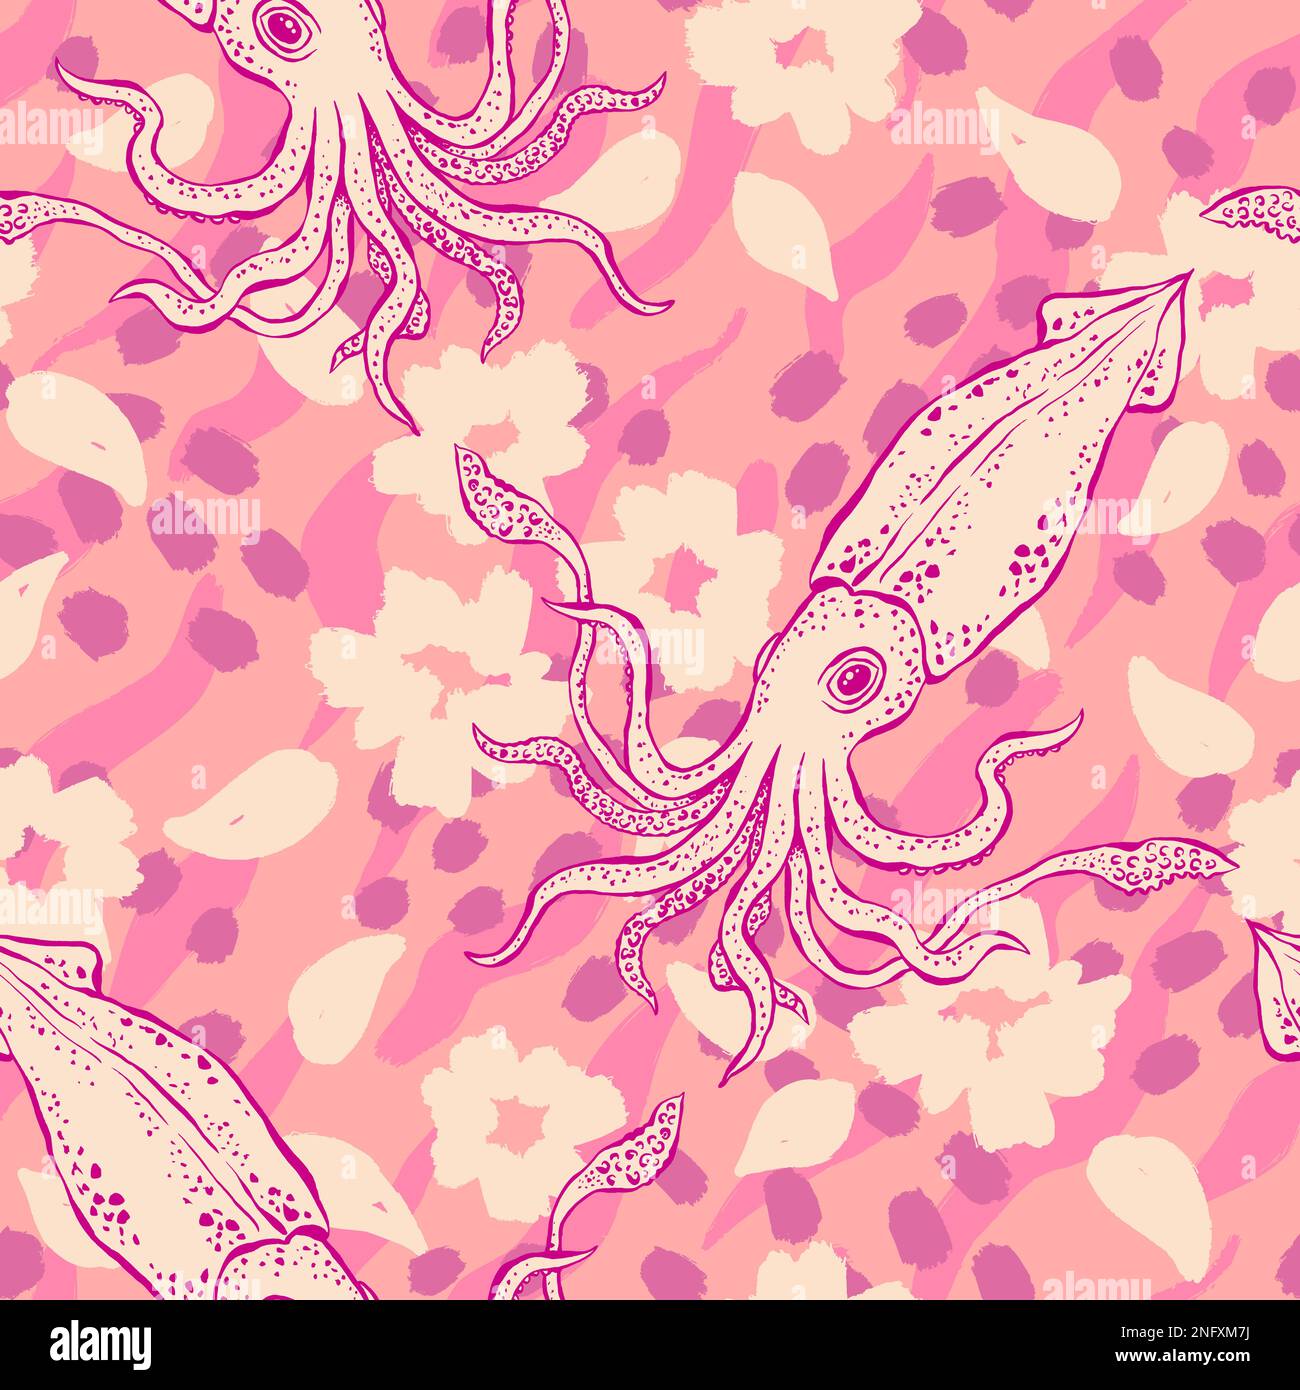 Pink seamless vector background. Beautiful cute endless pattern with squid and botanical elements. Fashion print for packing, textile, fabric. Stock Vector